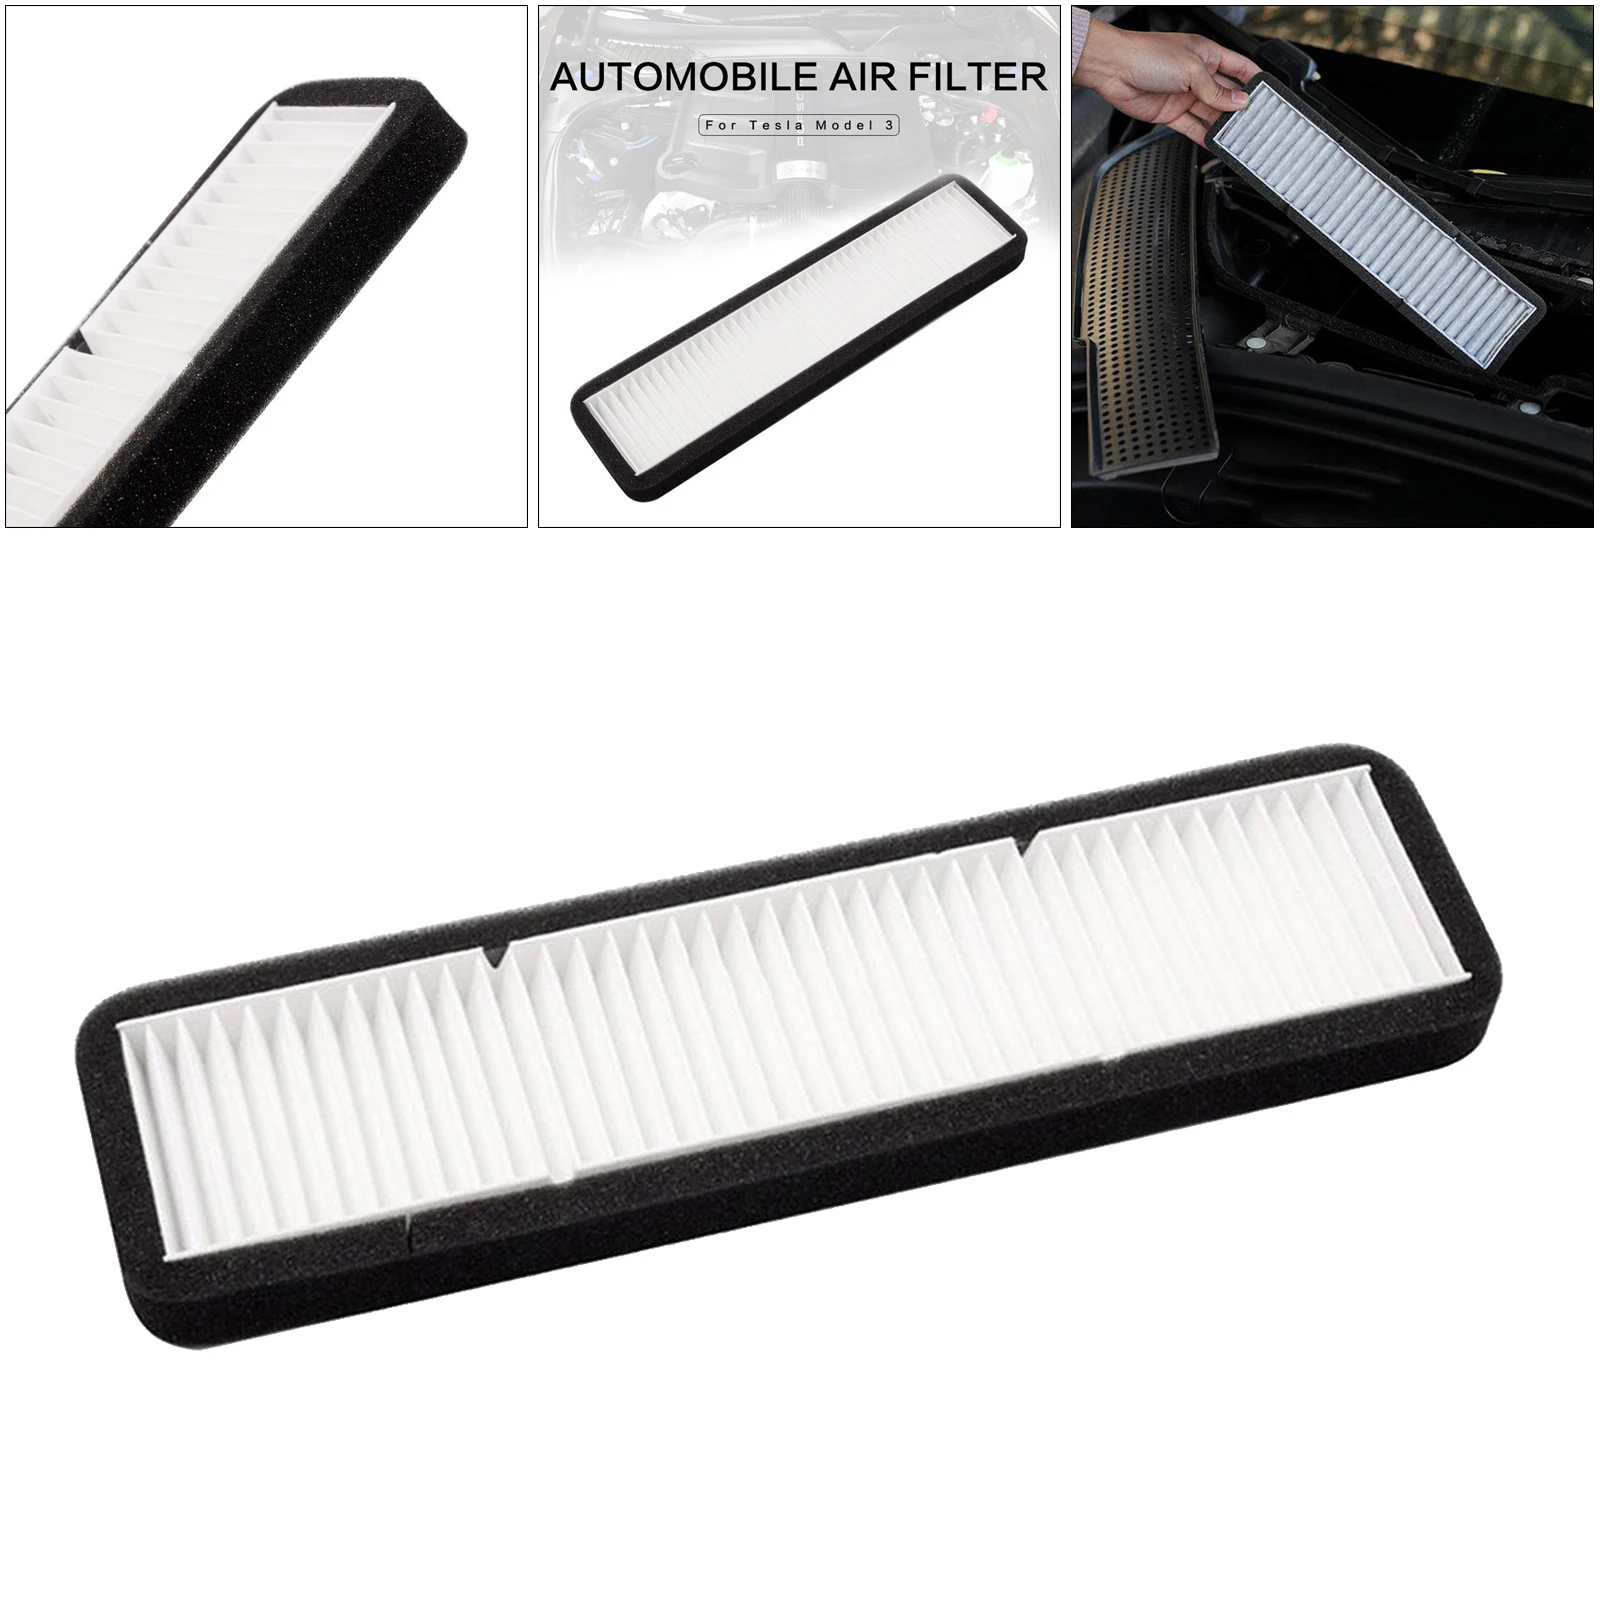 New Air Conditioning Filter Effective Blocking PM2.5 For Tesla Model 3 Y